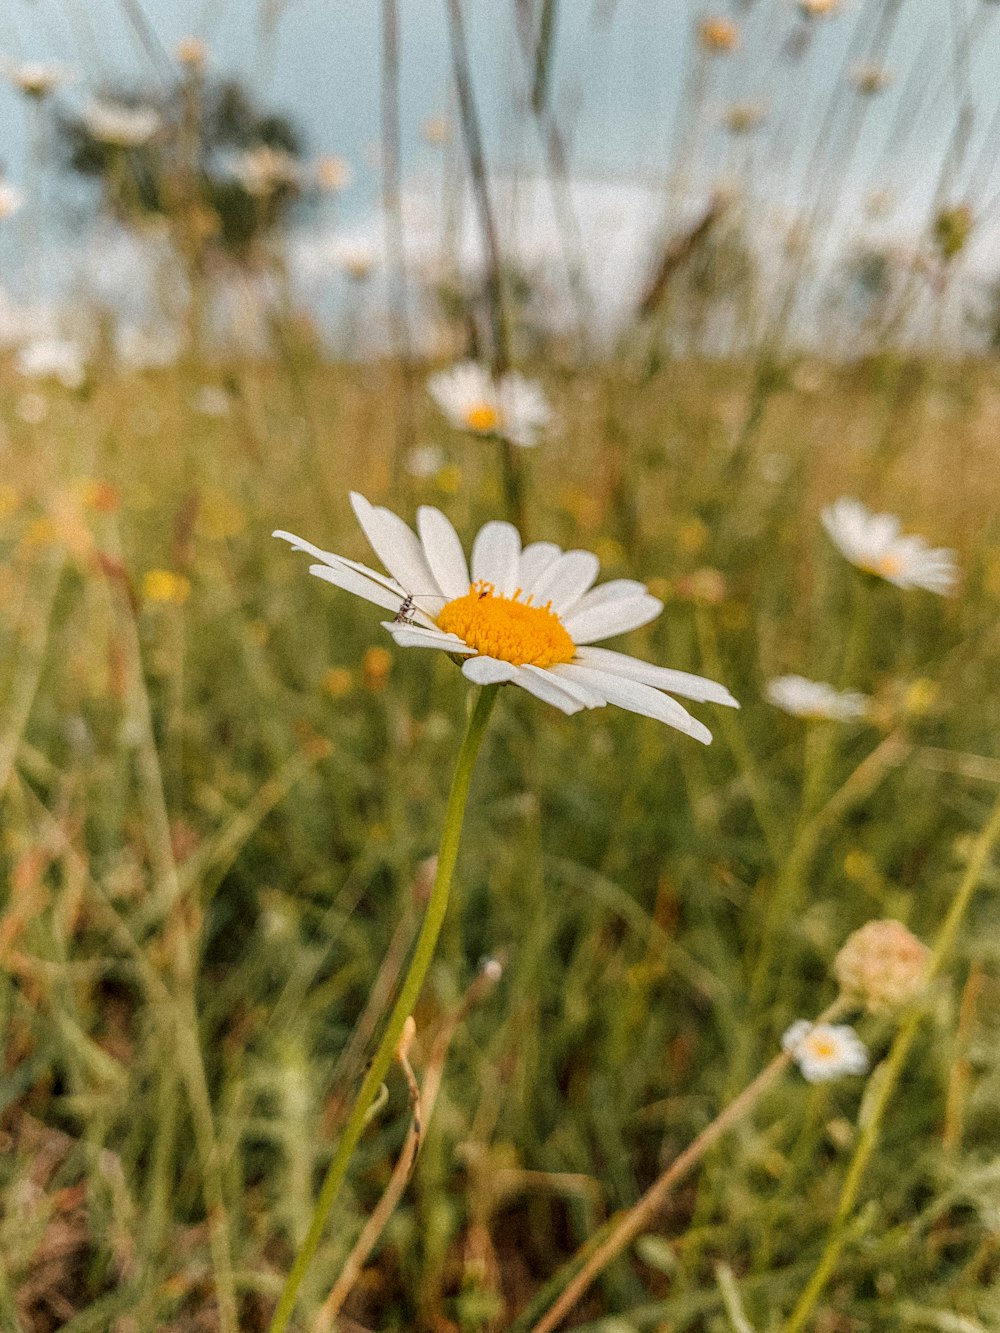 a single daisy in a field of tall grass